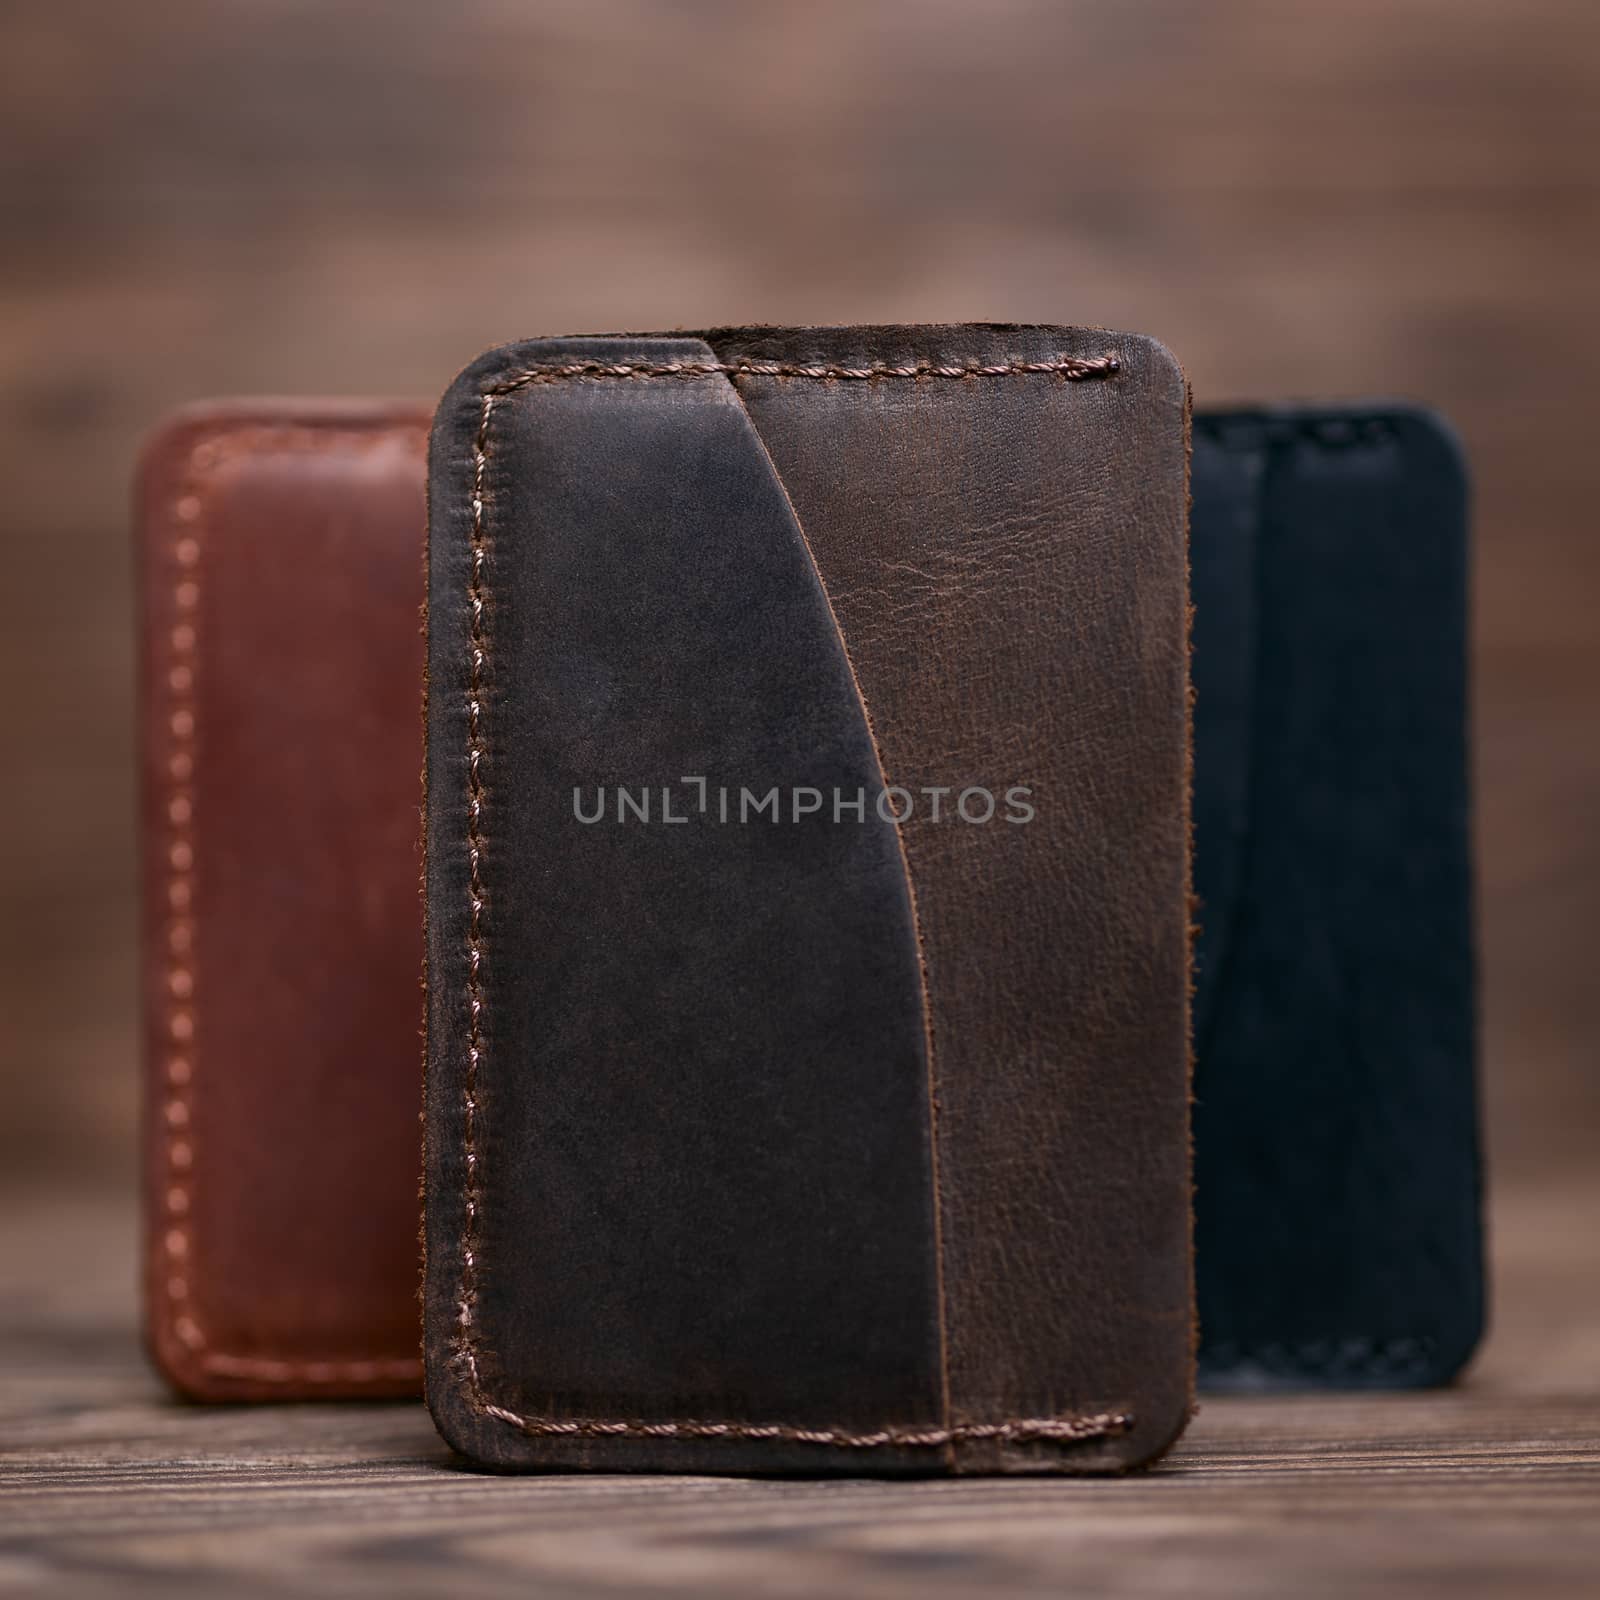 One pocket brown leather handmade cardholder. On blurred background stay other colour cardholders. Stock photo on blurred background. by alexsdriver